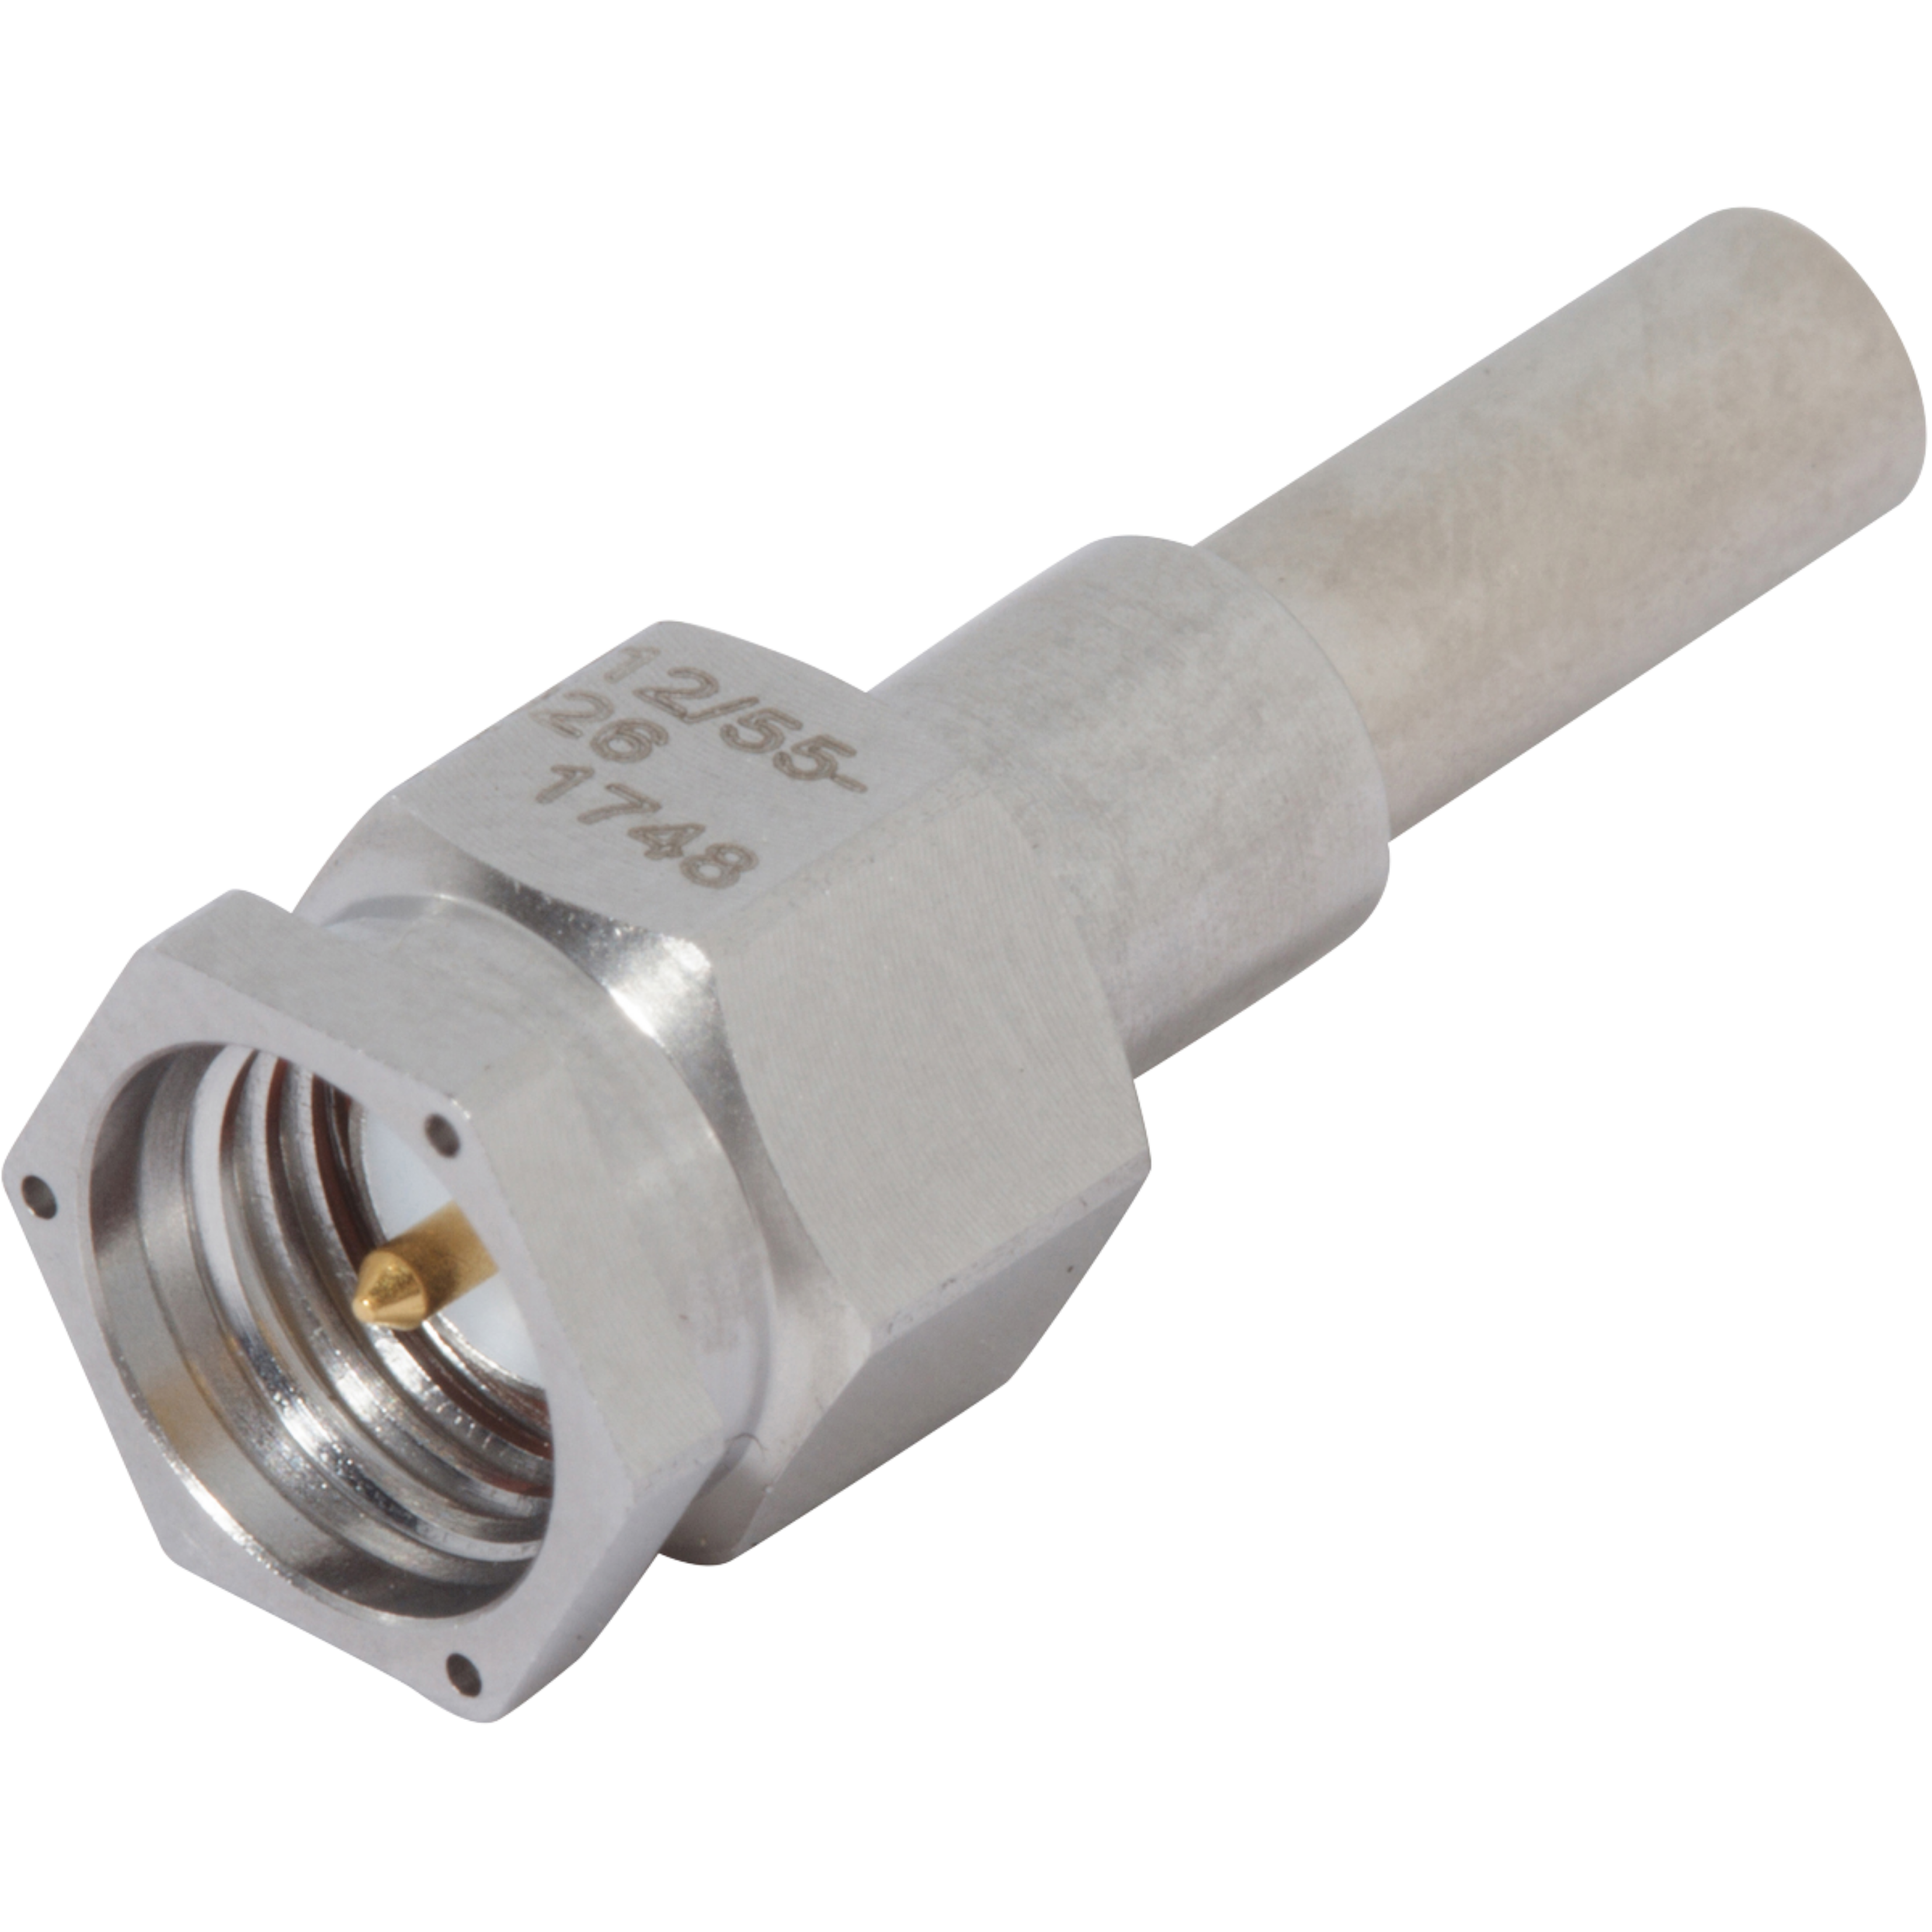 Picture of SMA Male Cable Connector, Lockwire Holes, for RG-58 Cable